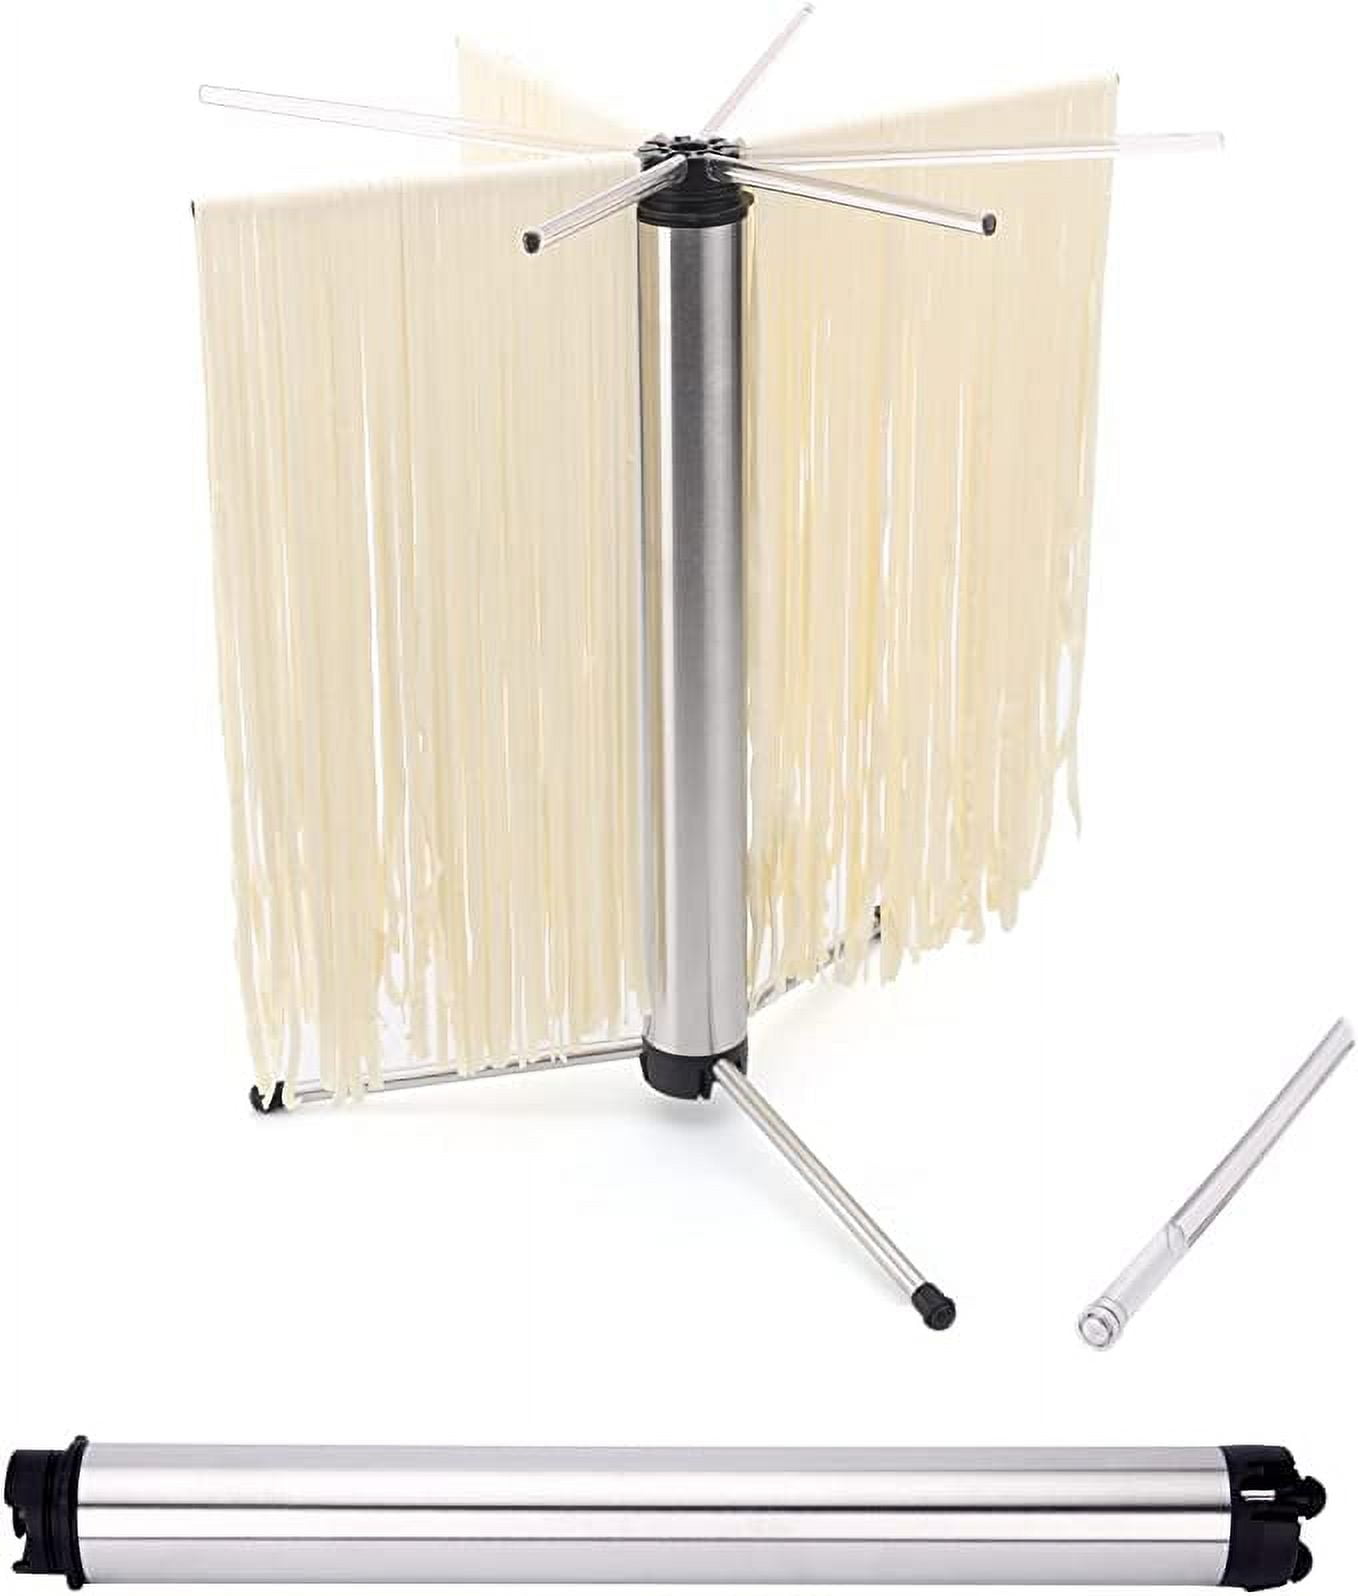 Collapsible Pasta Drying Rack Spaghetti Dryer